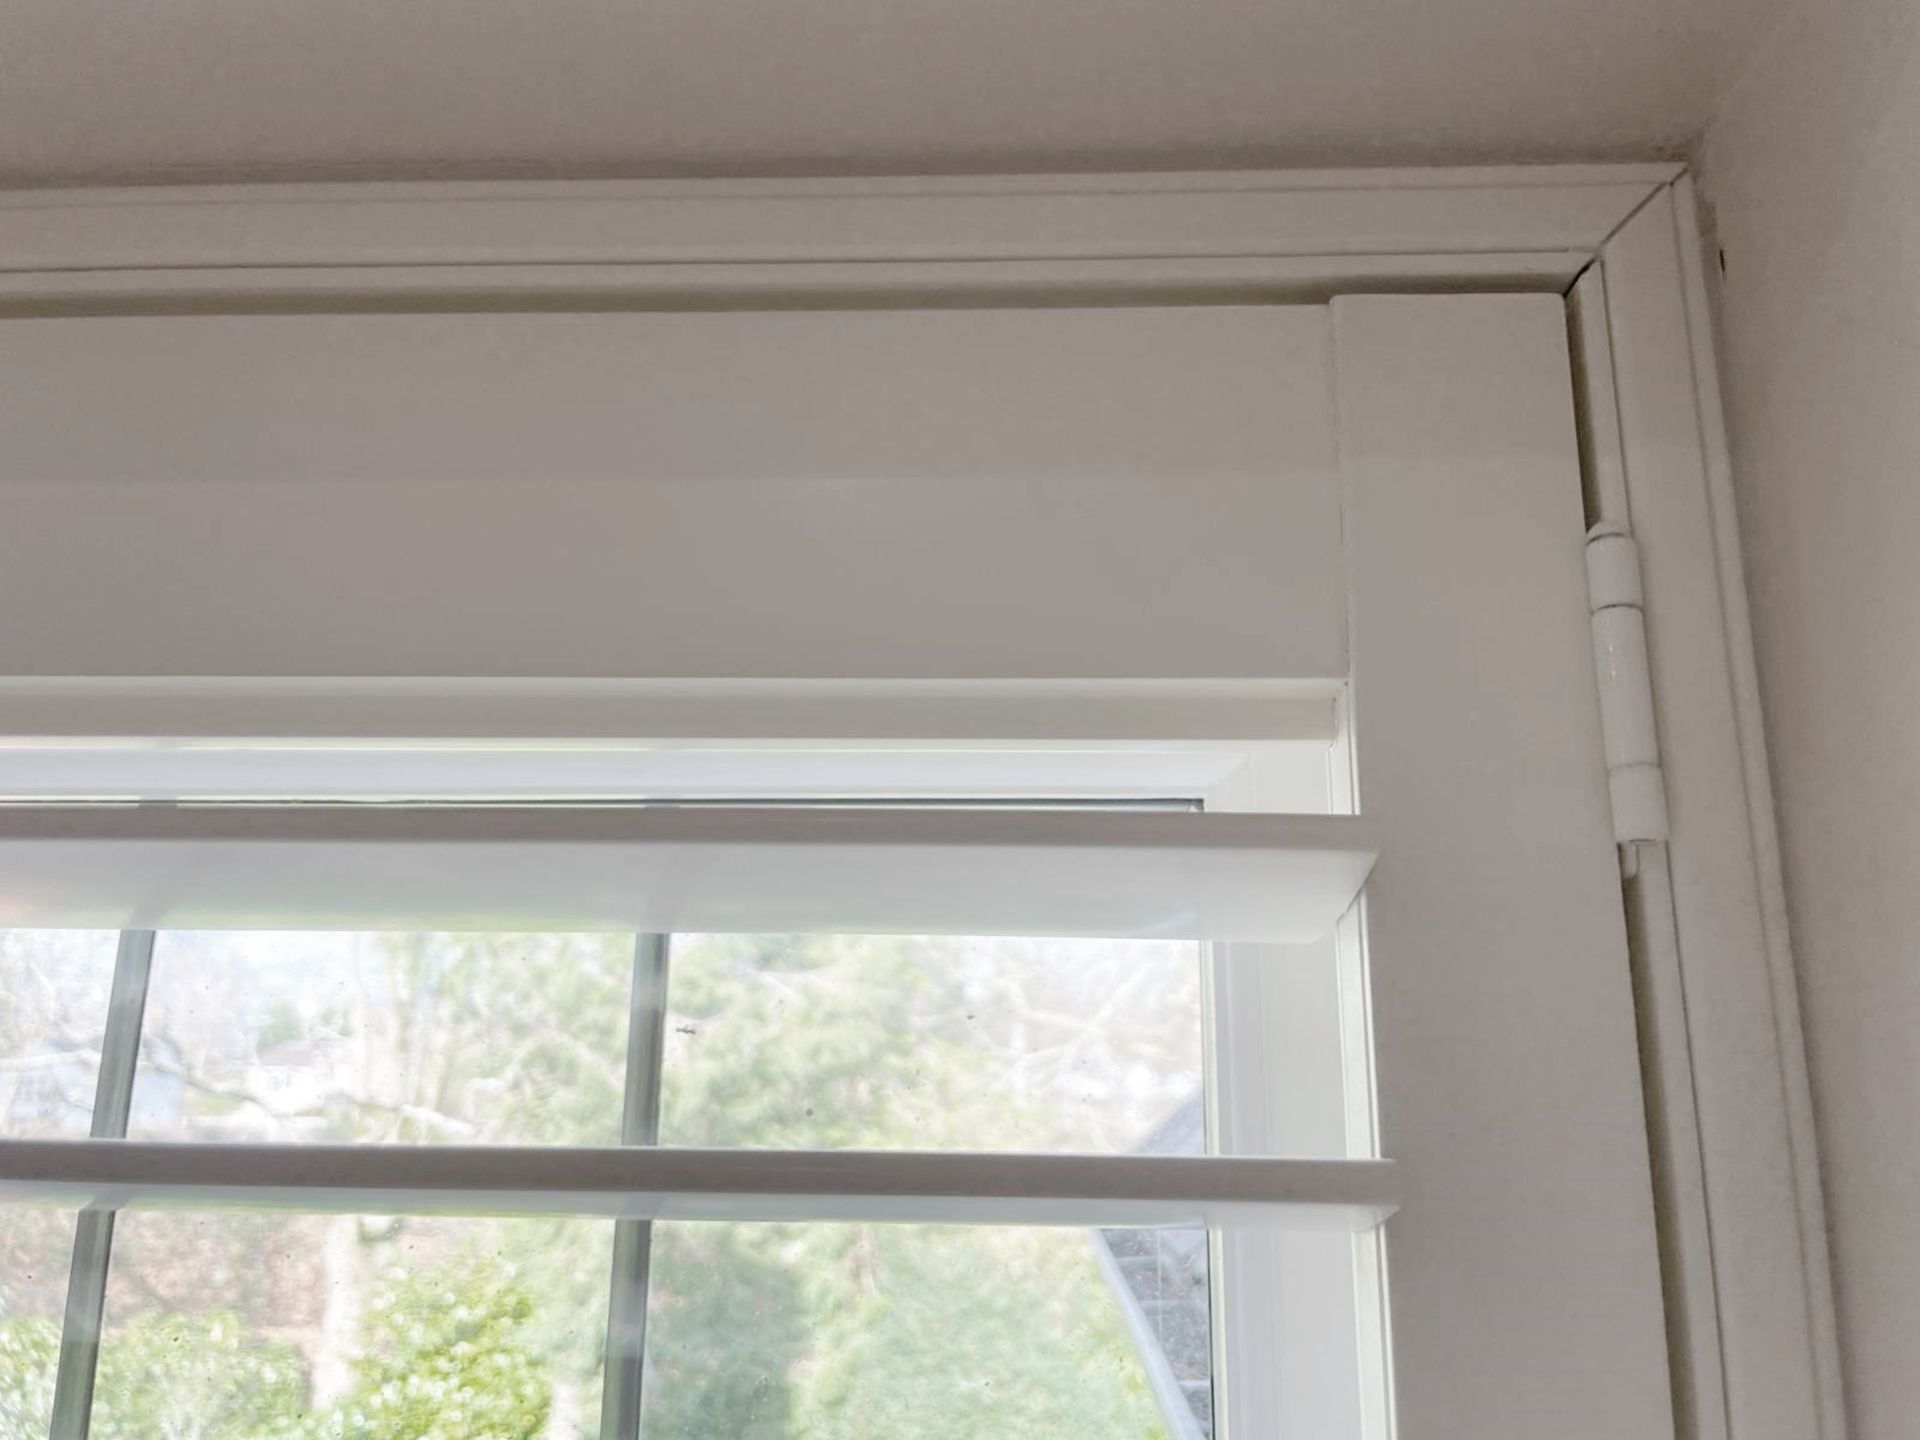 1 x Hardwood Timber Double Glazed Leaded 3-Pane Window Frame fitted with Shutter Blinds - Image 6 of 12